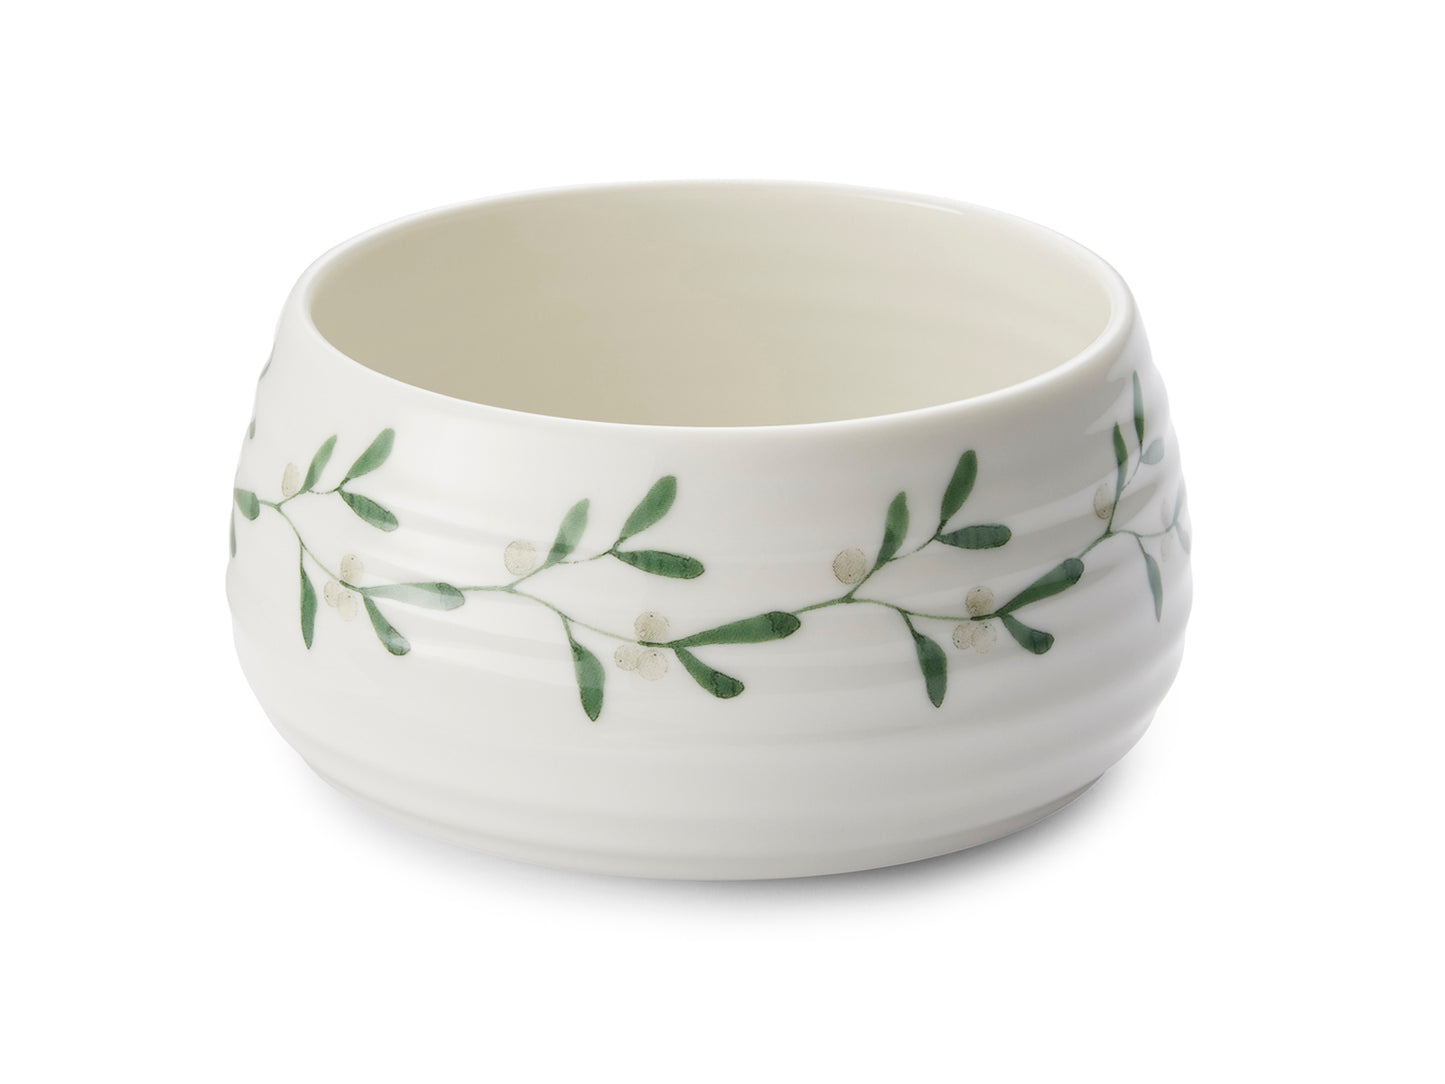 A small rounded dish, this would be perfect for serving a medley of mixed nuts or a fresh cranberry sauce. The piece is part of Sophie Conran's mistletoe colection and is made of a white porcelain that has been textured with a ripple design, and printed with a mistletoe pattern around its outside.